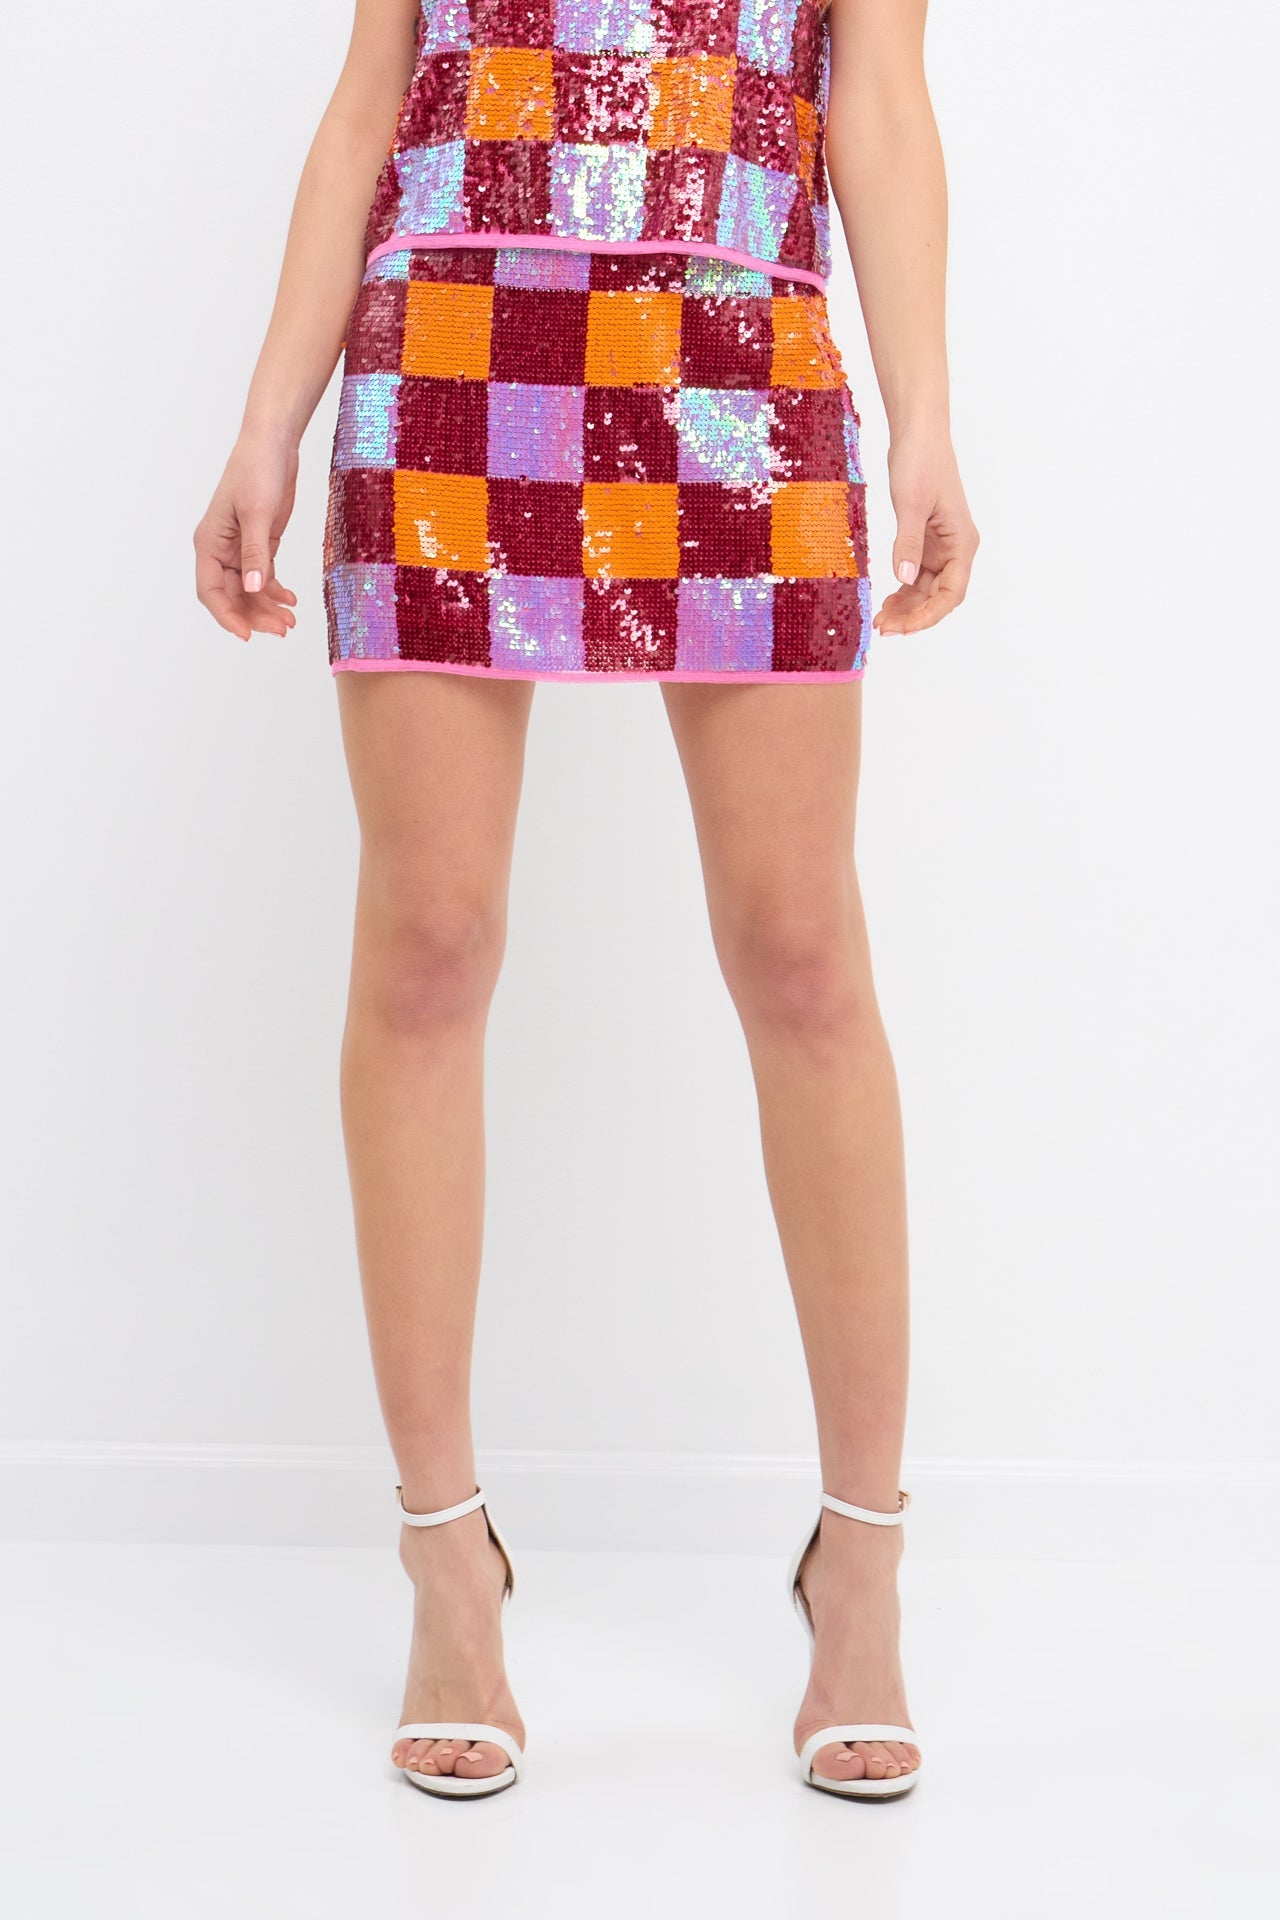 Endless Rose - Checkered Sequin Mini Skirt - Skirts in Women's Clothing available at endlessrose.com